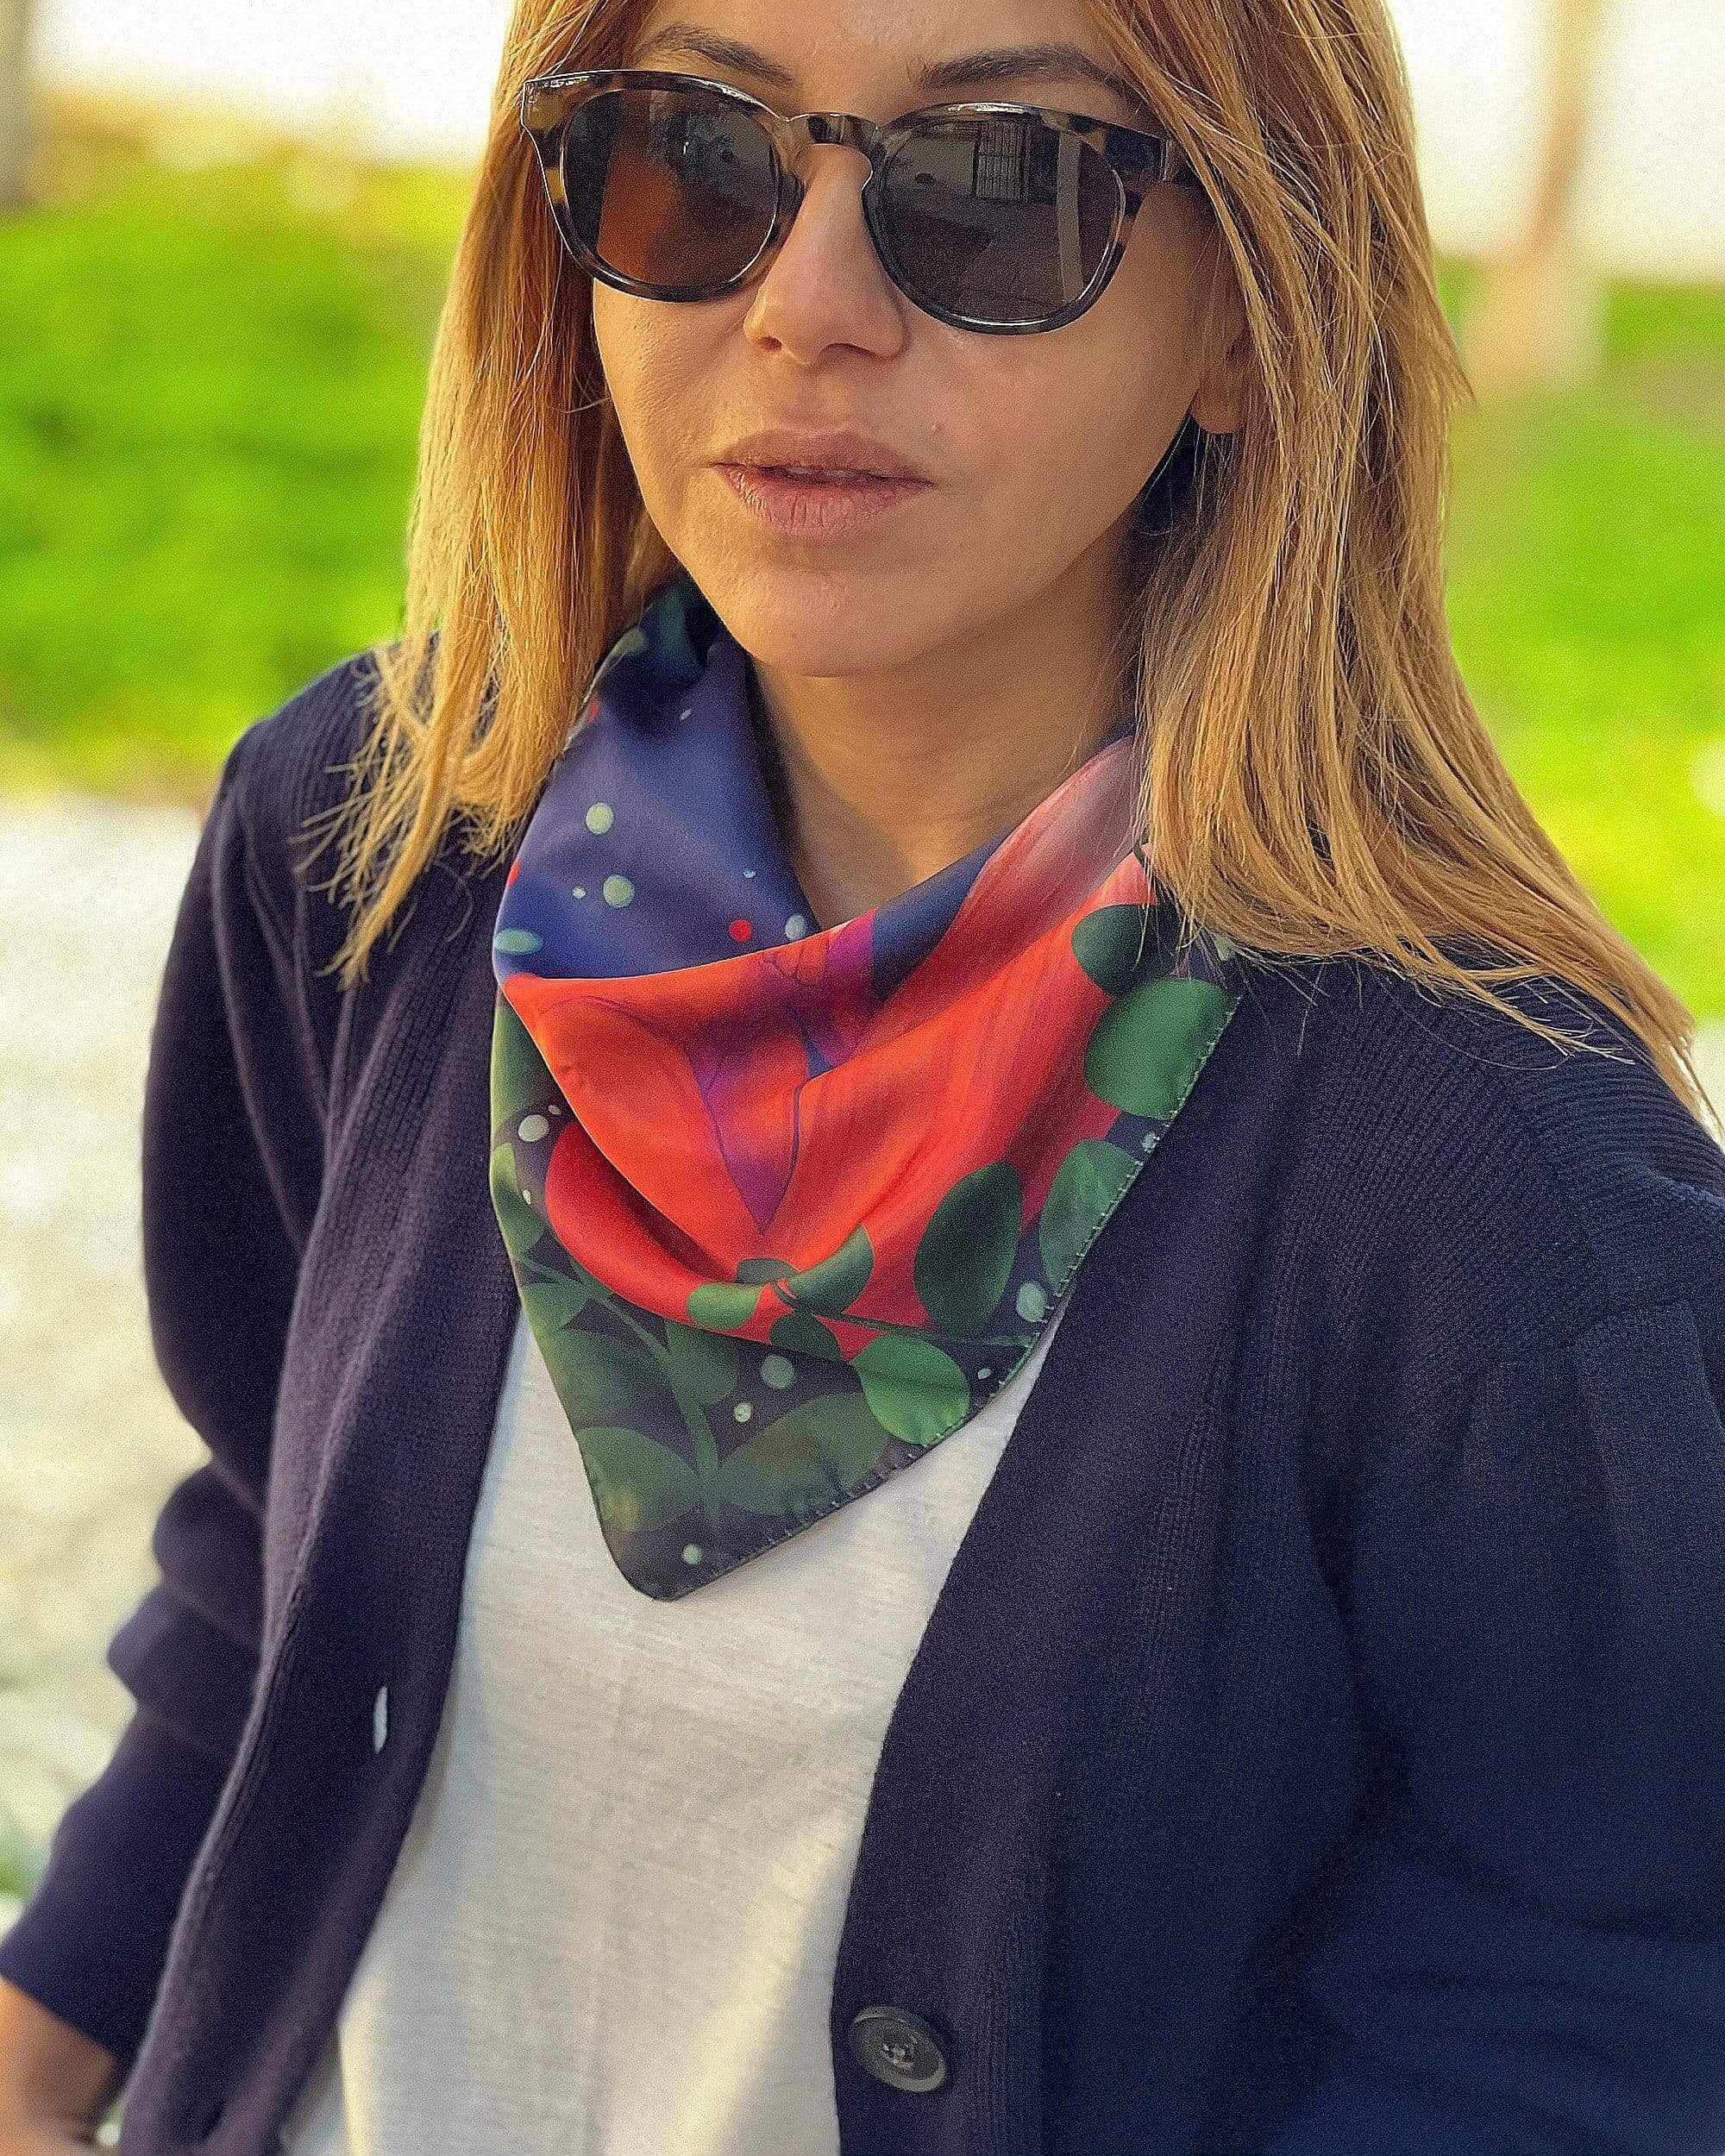 If you are looking for a special gift that will make a woman feel special, then you should go for an animal pattern satin scarf. It is one of the best birthday gifts that a woman can receive.